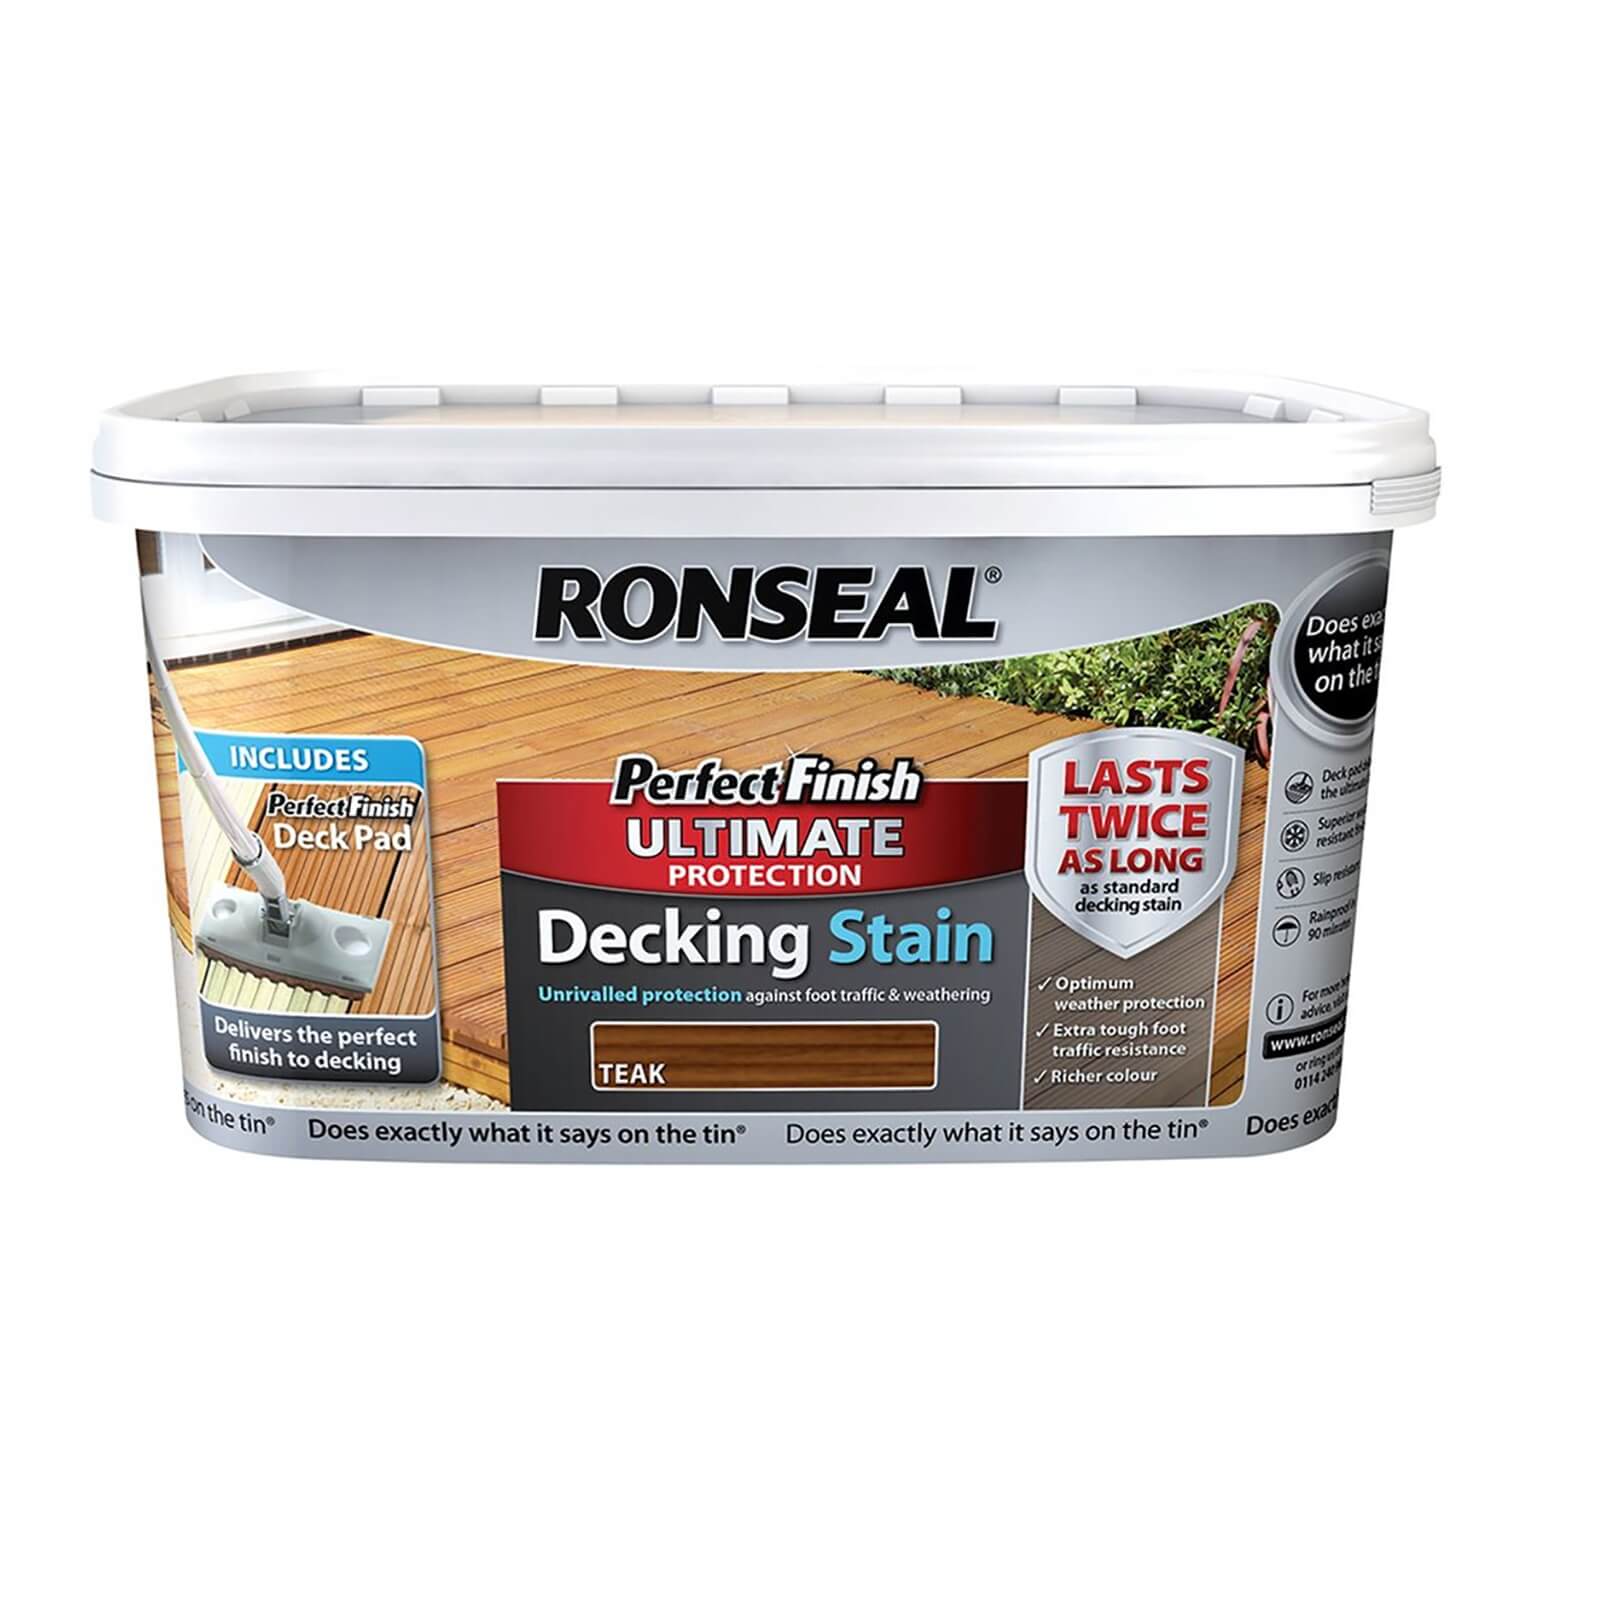 C23 RONSEAL P/FINISH ULT DECK STAIN RICH